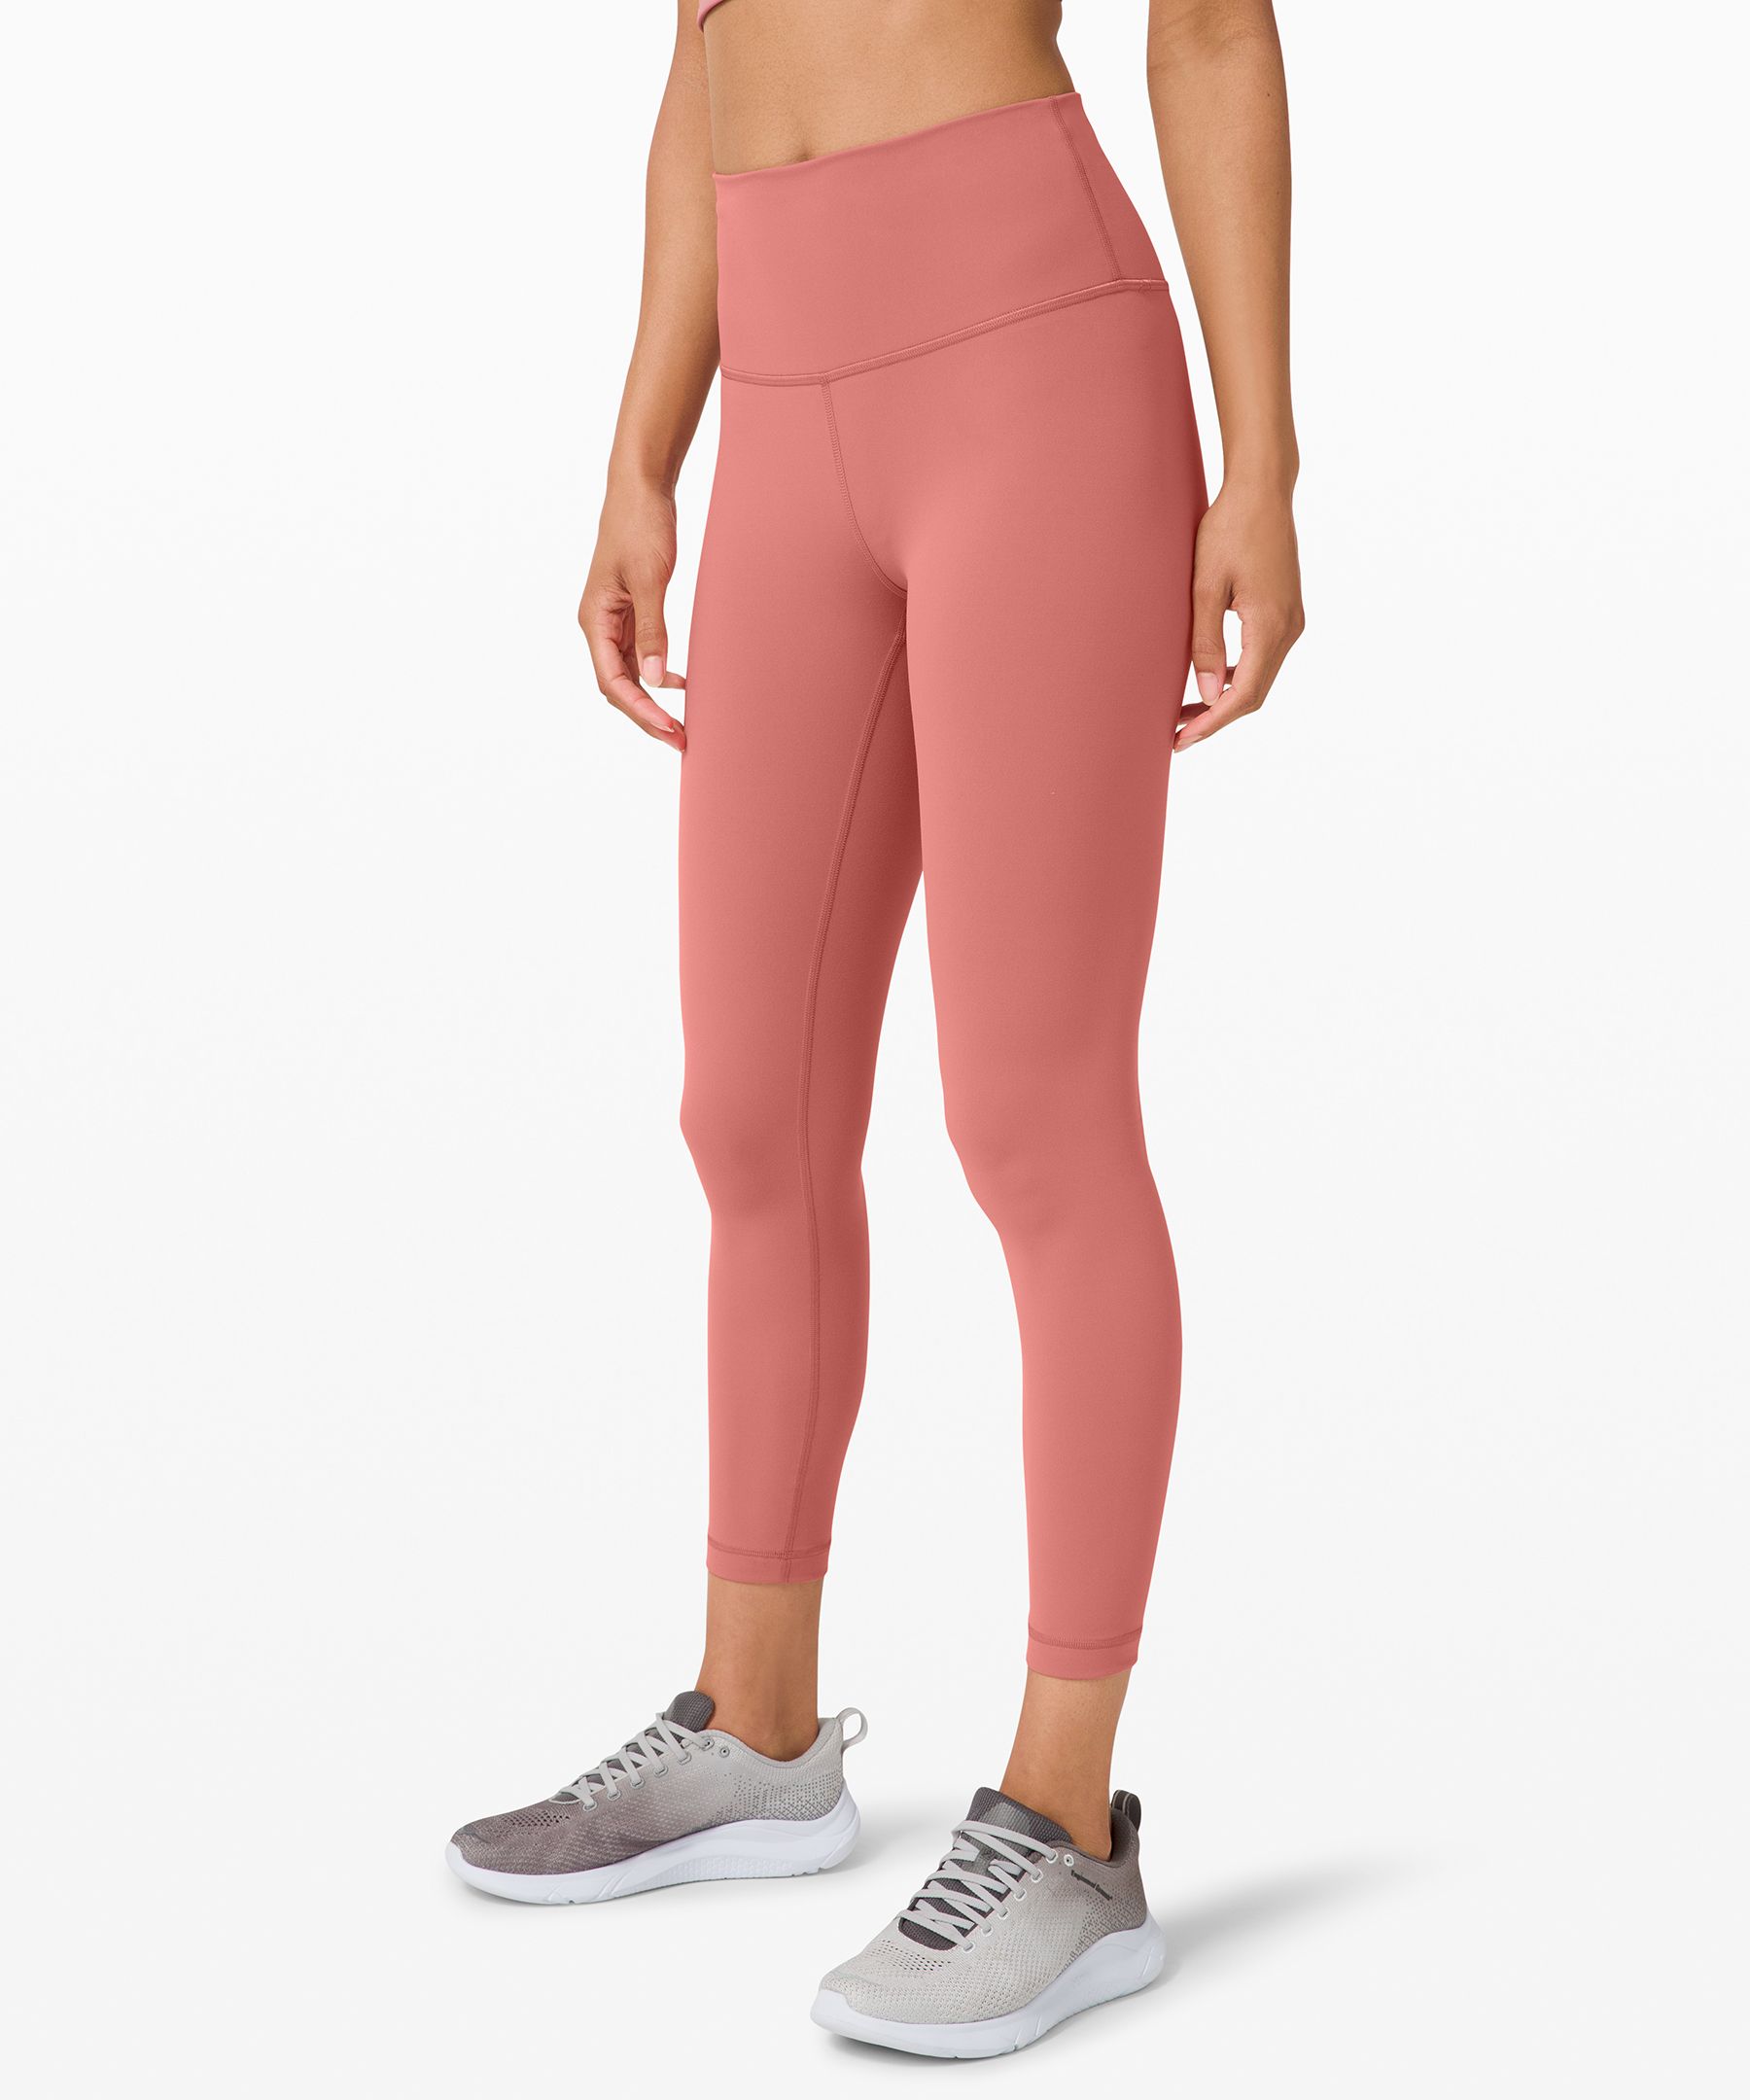 Lululemon In Movement Tight 25 *Everlux - Rustic Coral - lulu